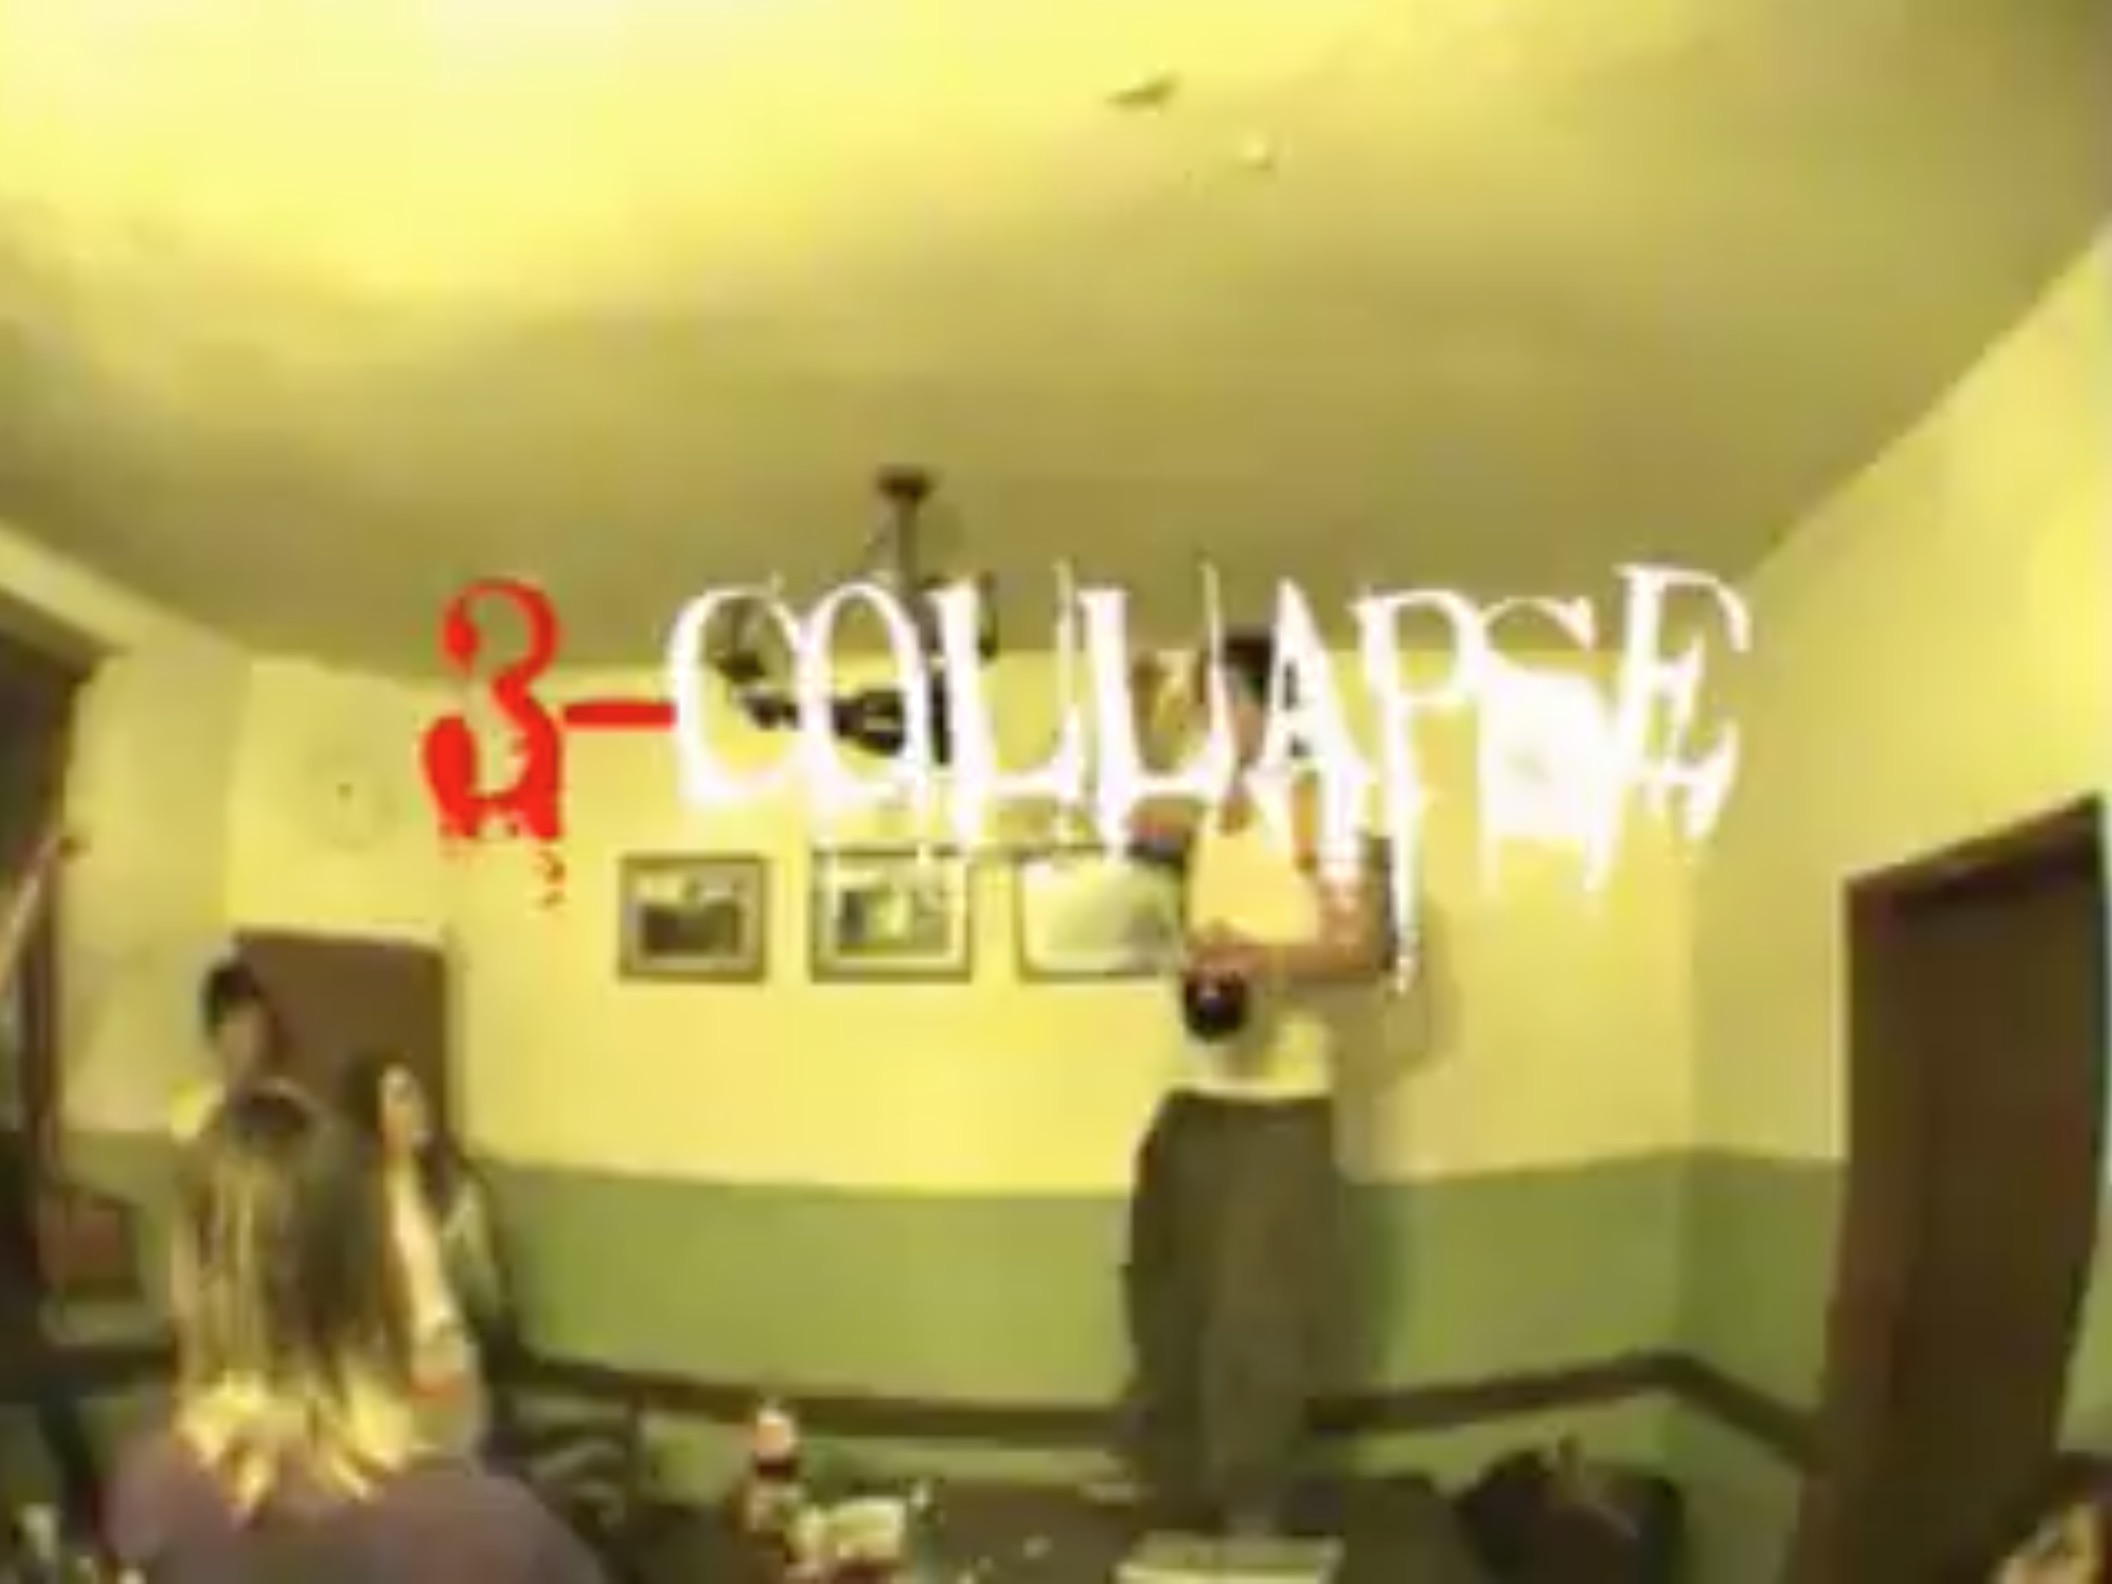 3-Collapse cover